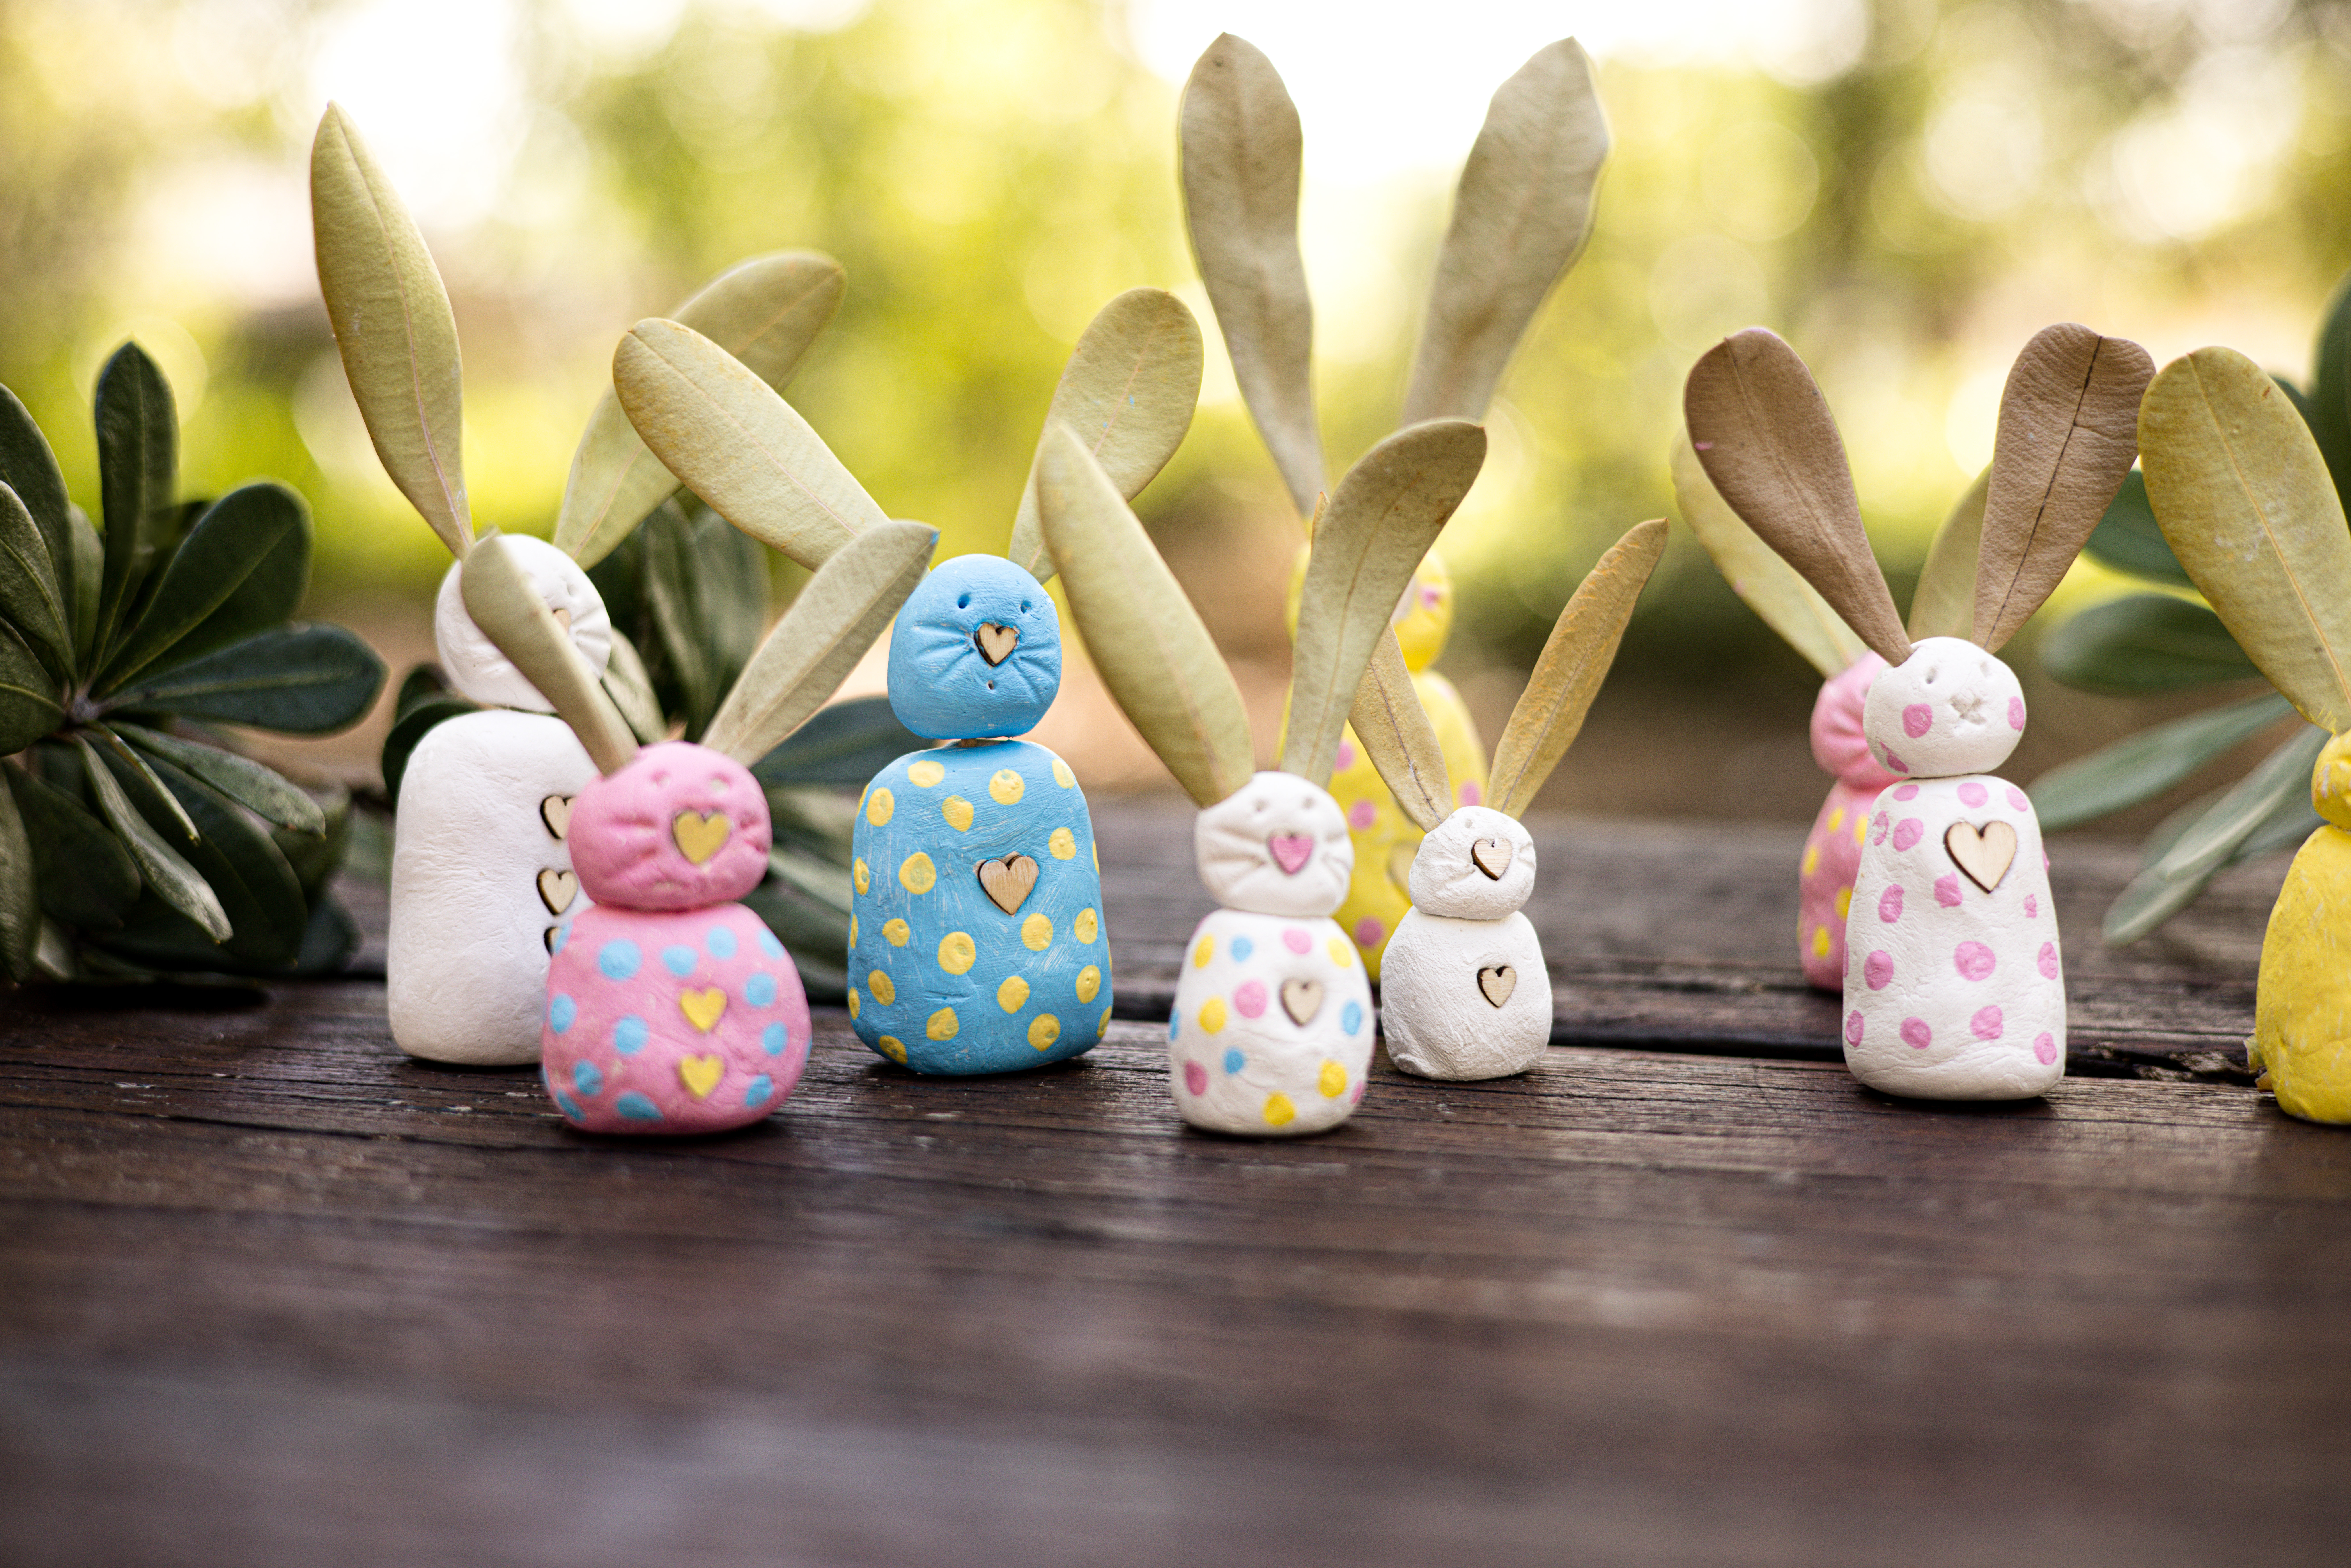 https://poppyanddaisydesigns.com.au/wp-content/uploads/2023/02/easter-craft-kits-for-kids-to-get-creative-at-easter.jpg